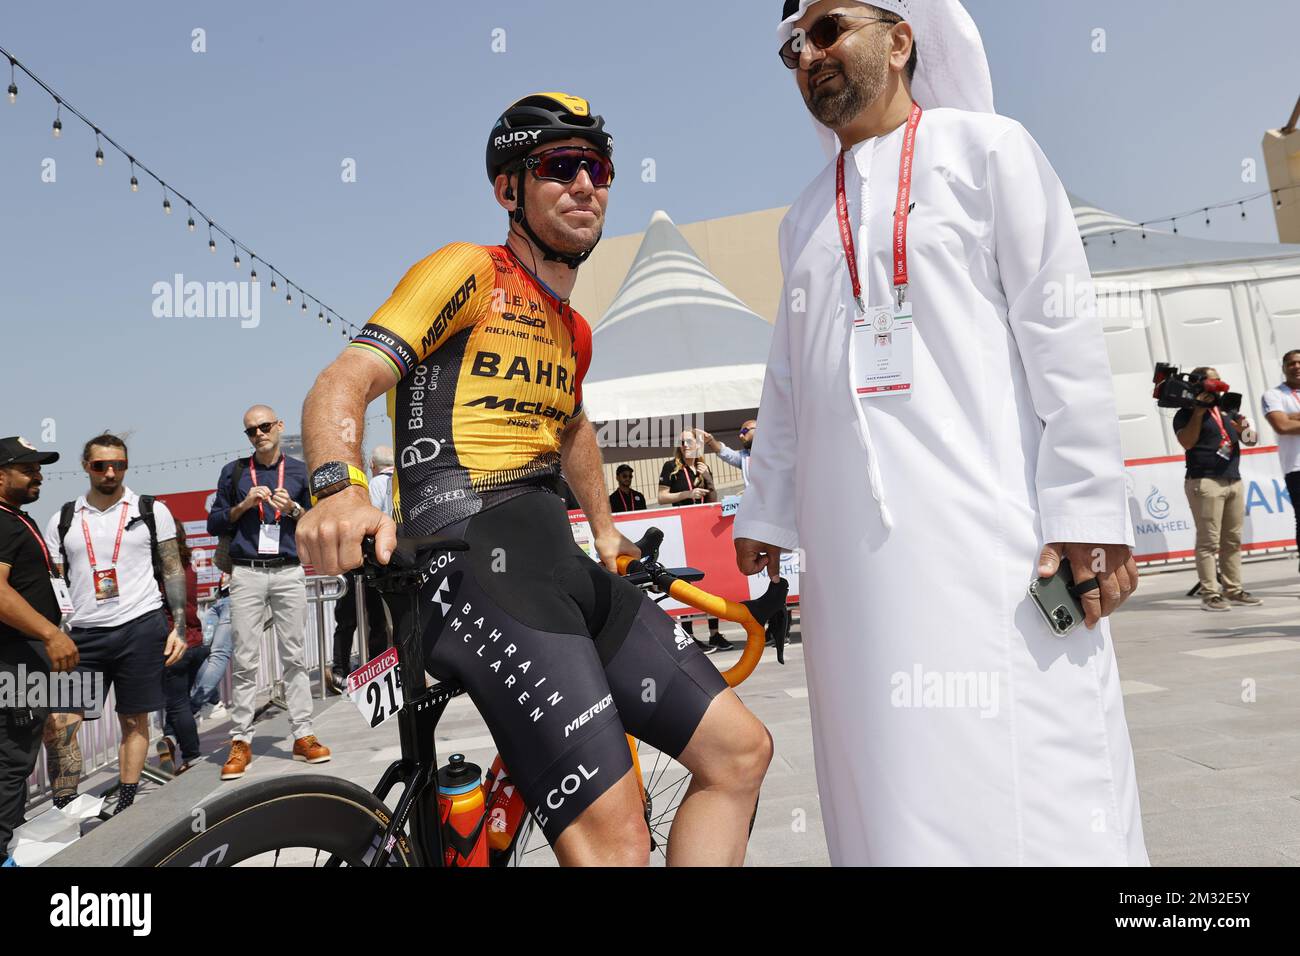 British Mark Cavendish of Bahrain-Merida and Aref Hamad Al Awani pictured at stage 1 of the 'UAE Tour' 2020 cycling race 148km from Dubai The Pointe to Dubai Silicon Oasis in Dubai, United Arab Emirates, Sunday 23 February 2020. This year's edition is taking place from 23 February to 29 February. BELGA PHOTO YUZURU SUNADA FRANCE OUT Stock Photo